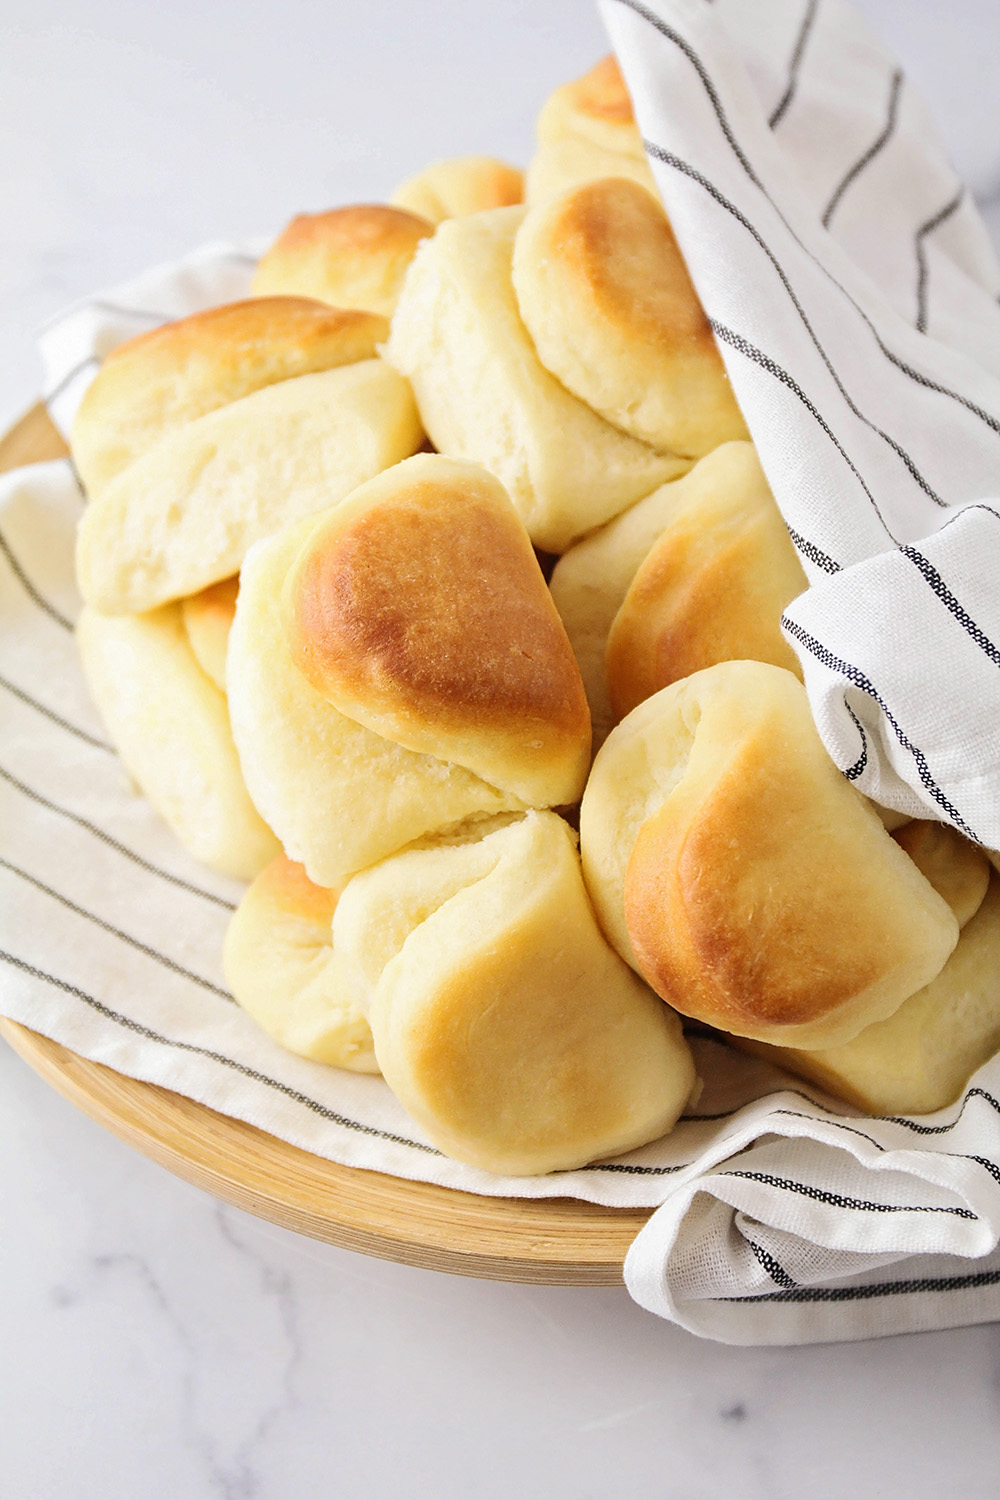 These Parker house rolls are so tender and soft, with the perfect light texture and buttery flavor!